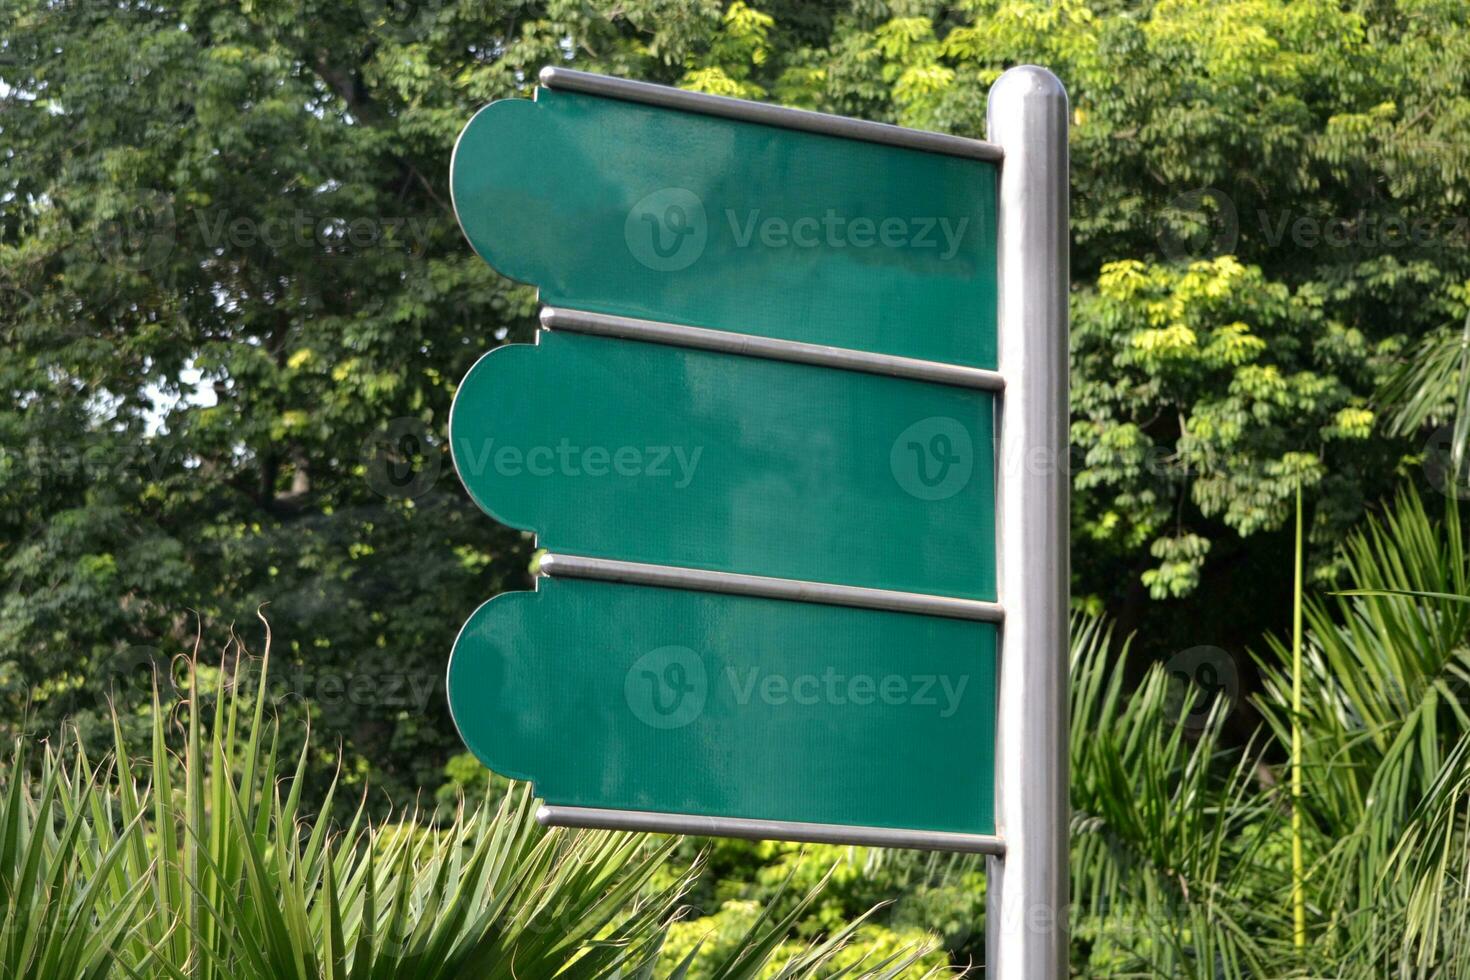 Green Metal Signpost With Trees on Second Plan photo